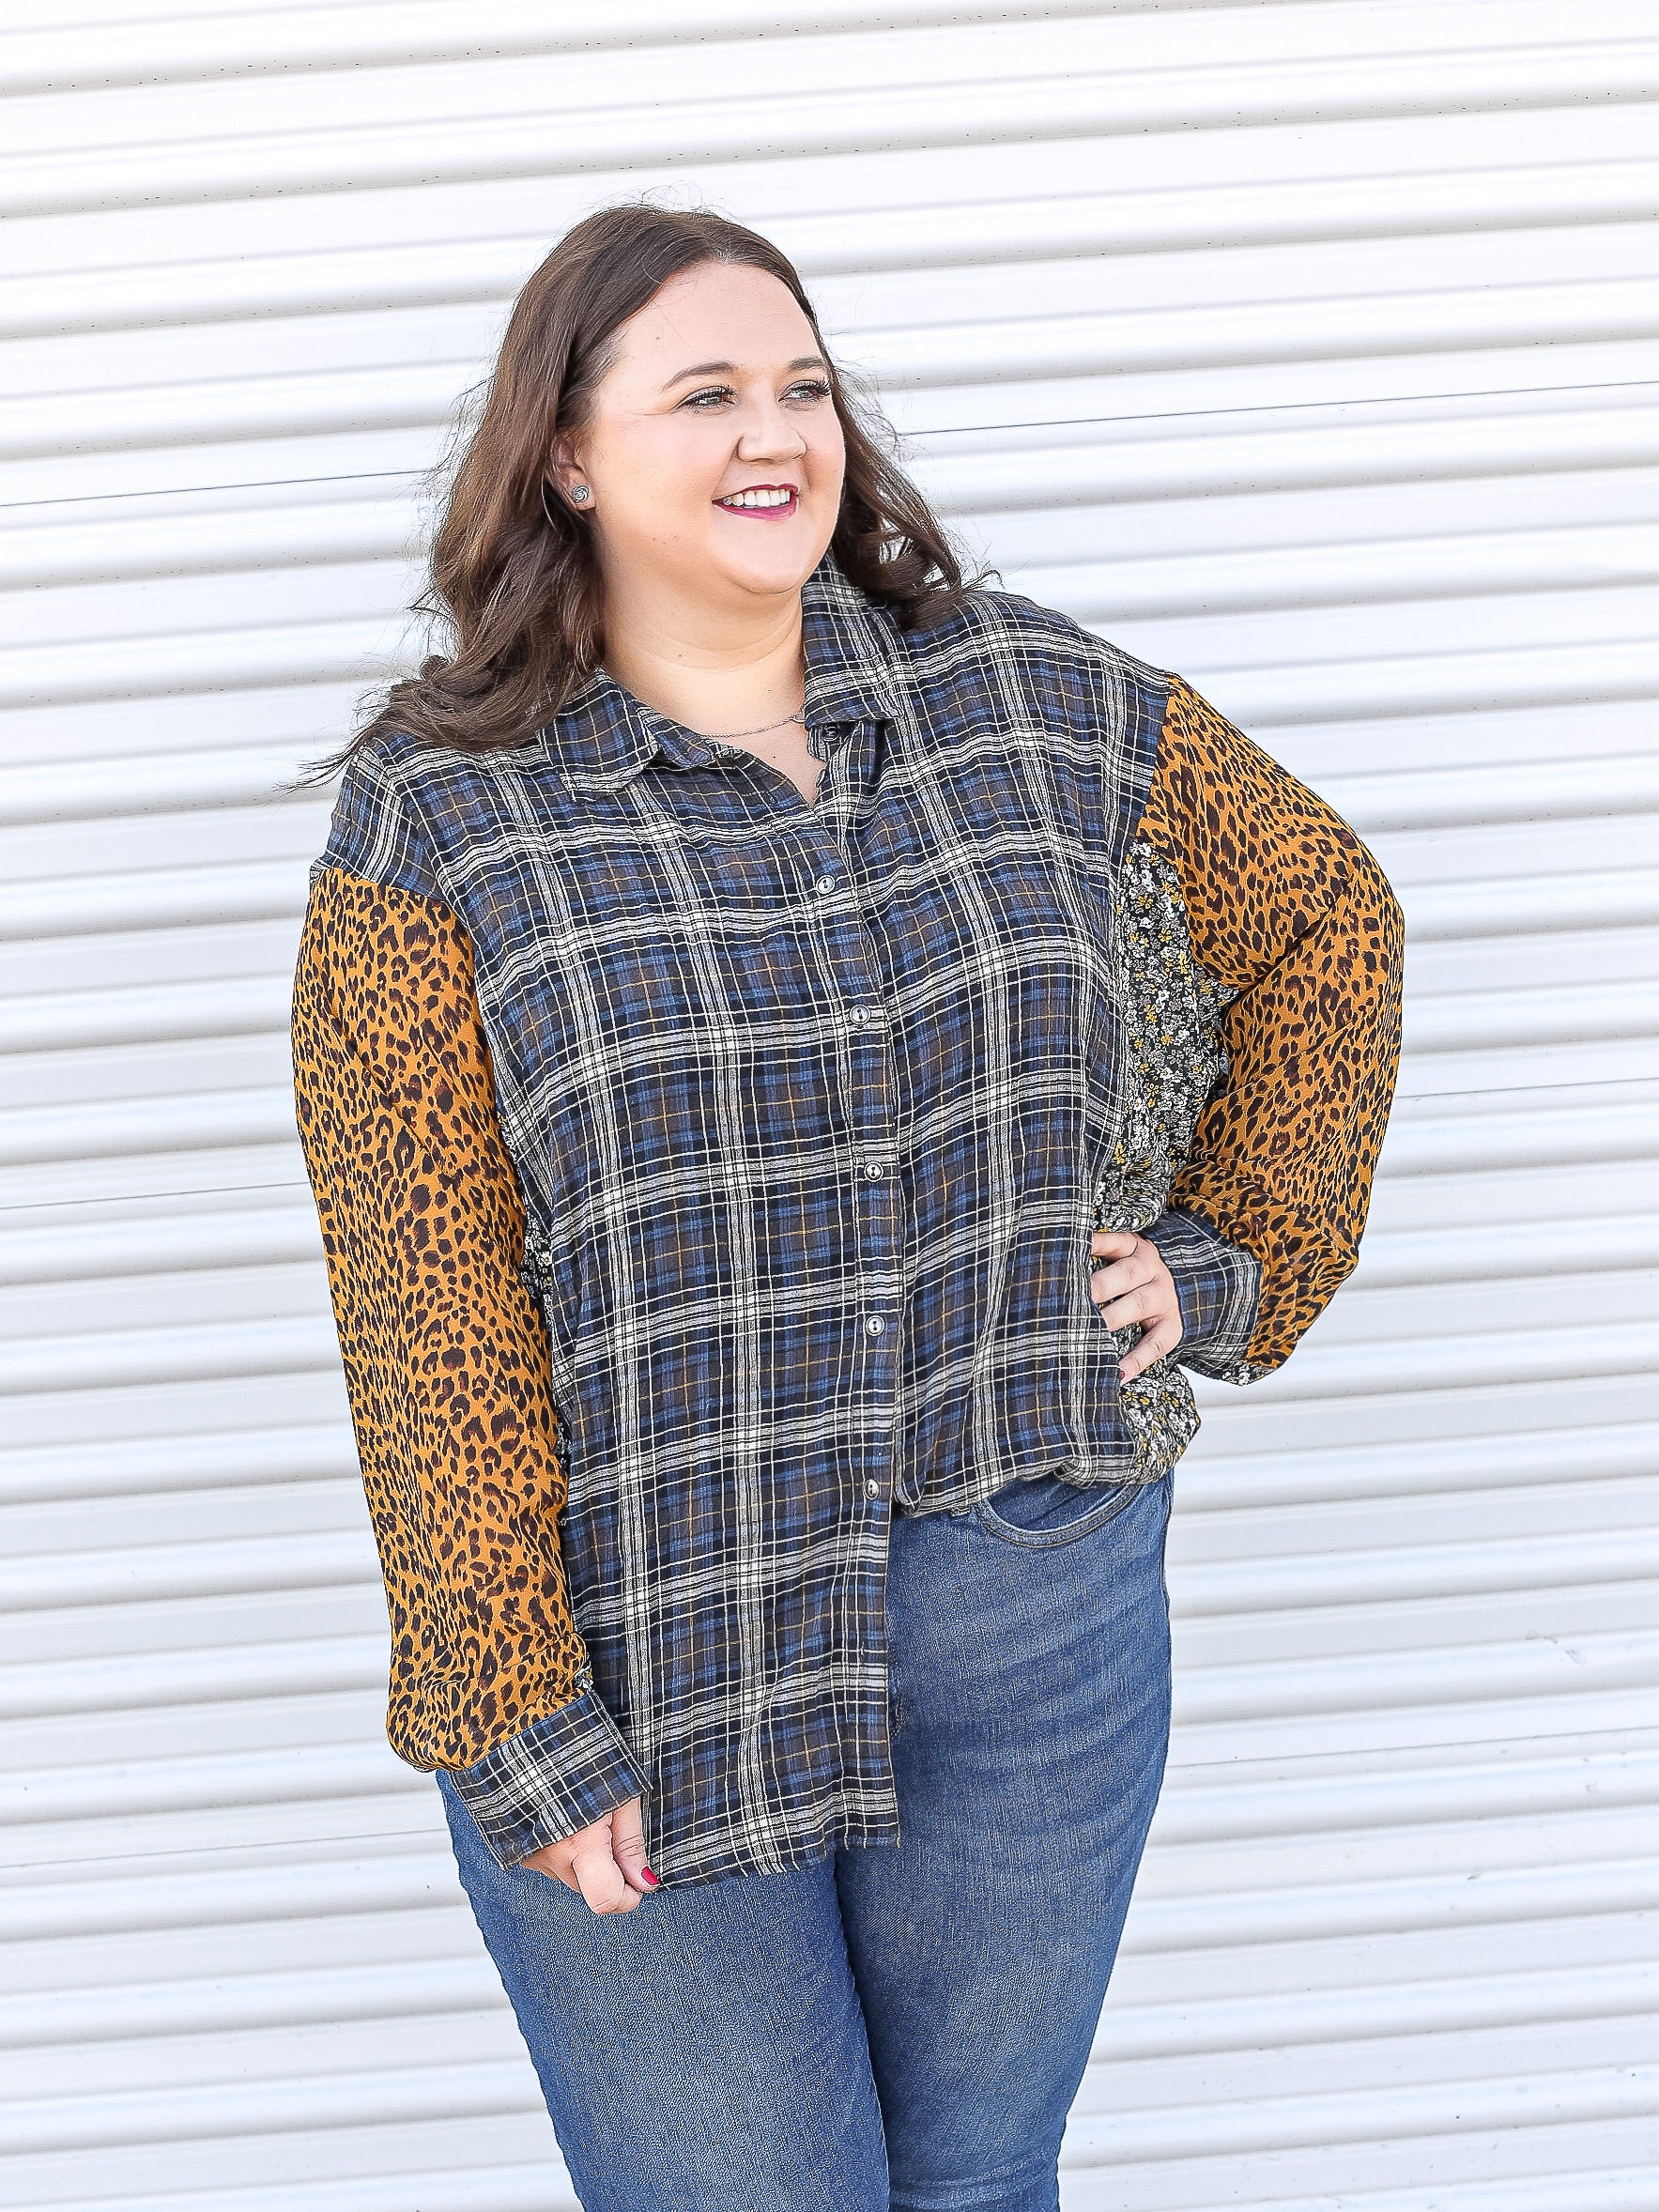 Plaid button down top with leopard and floral patterns on the sleeve. 